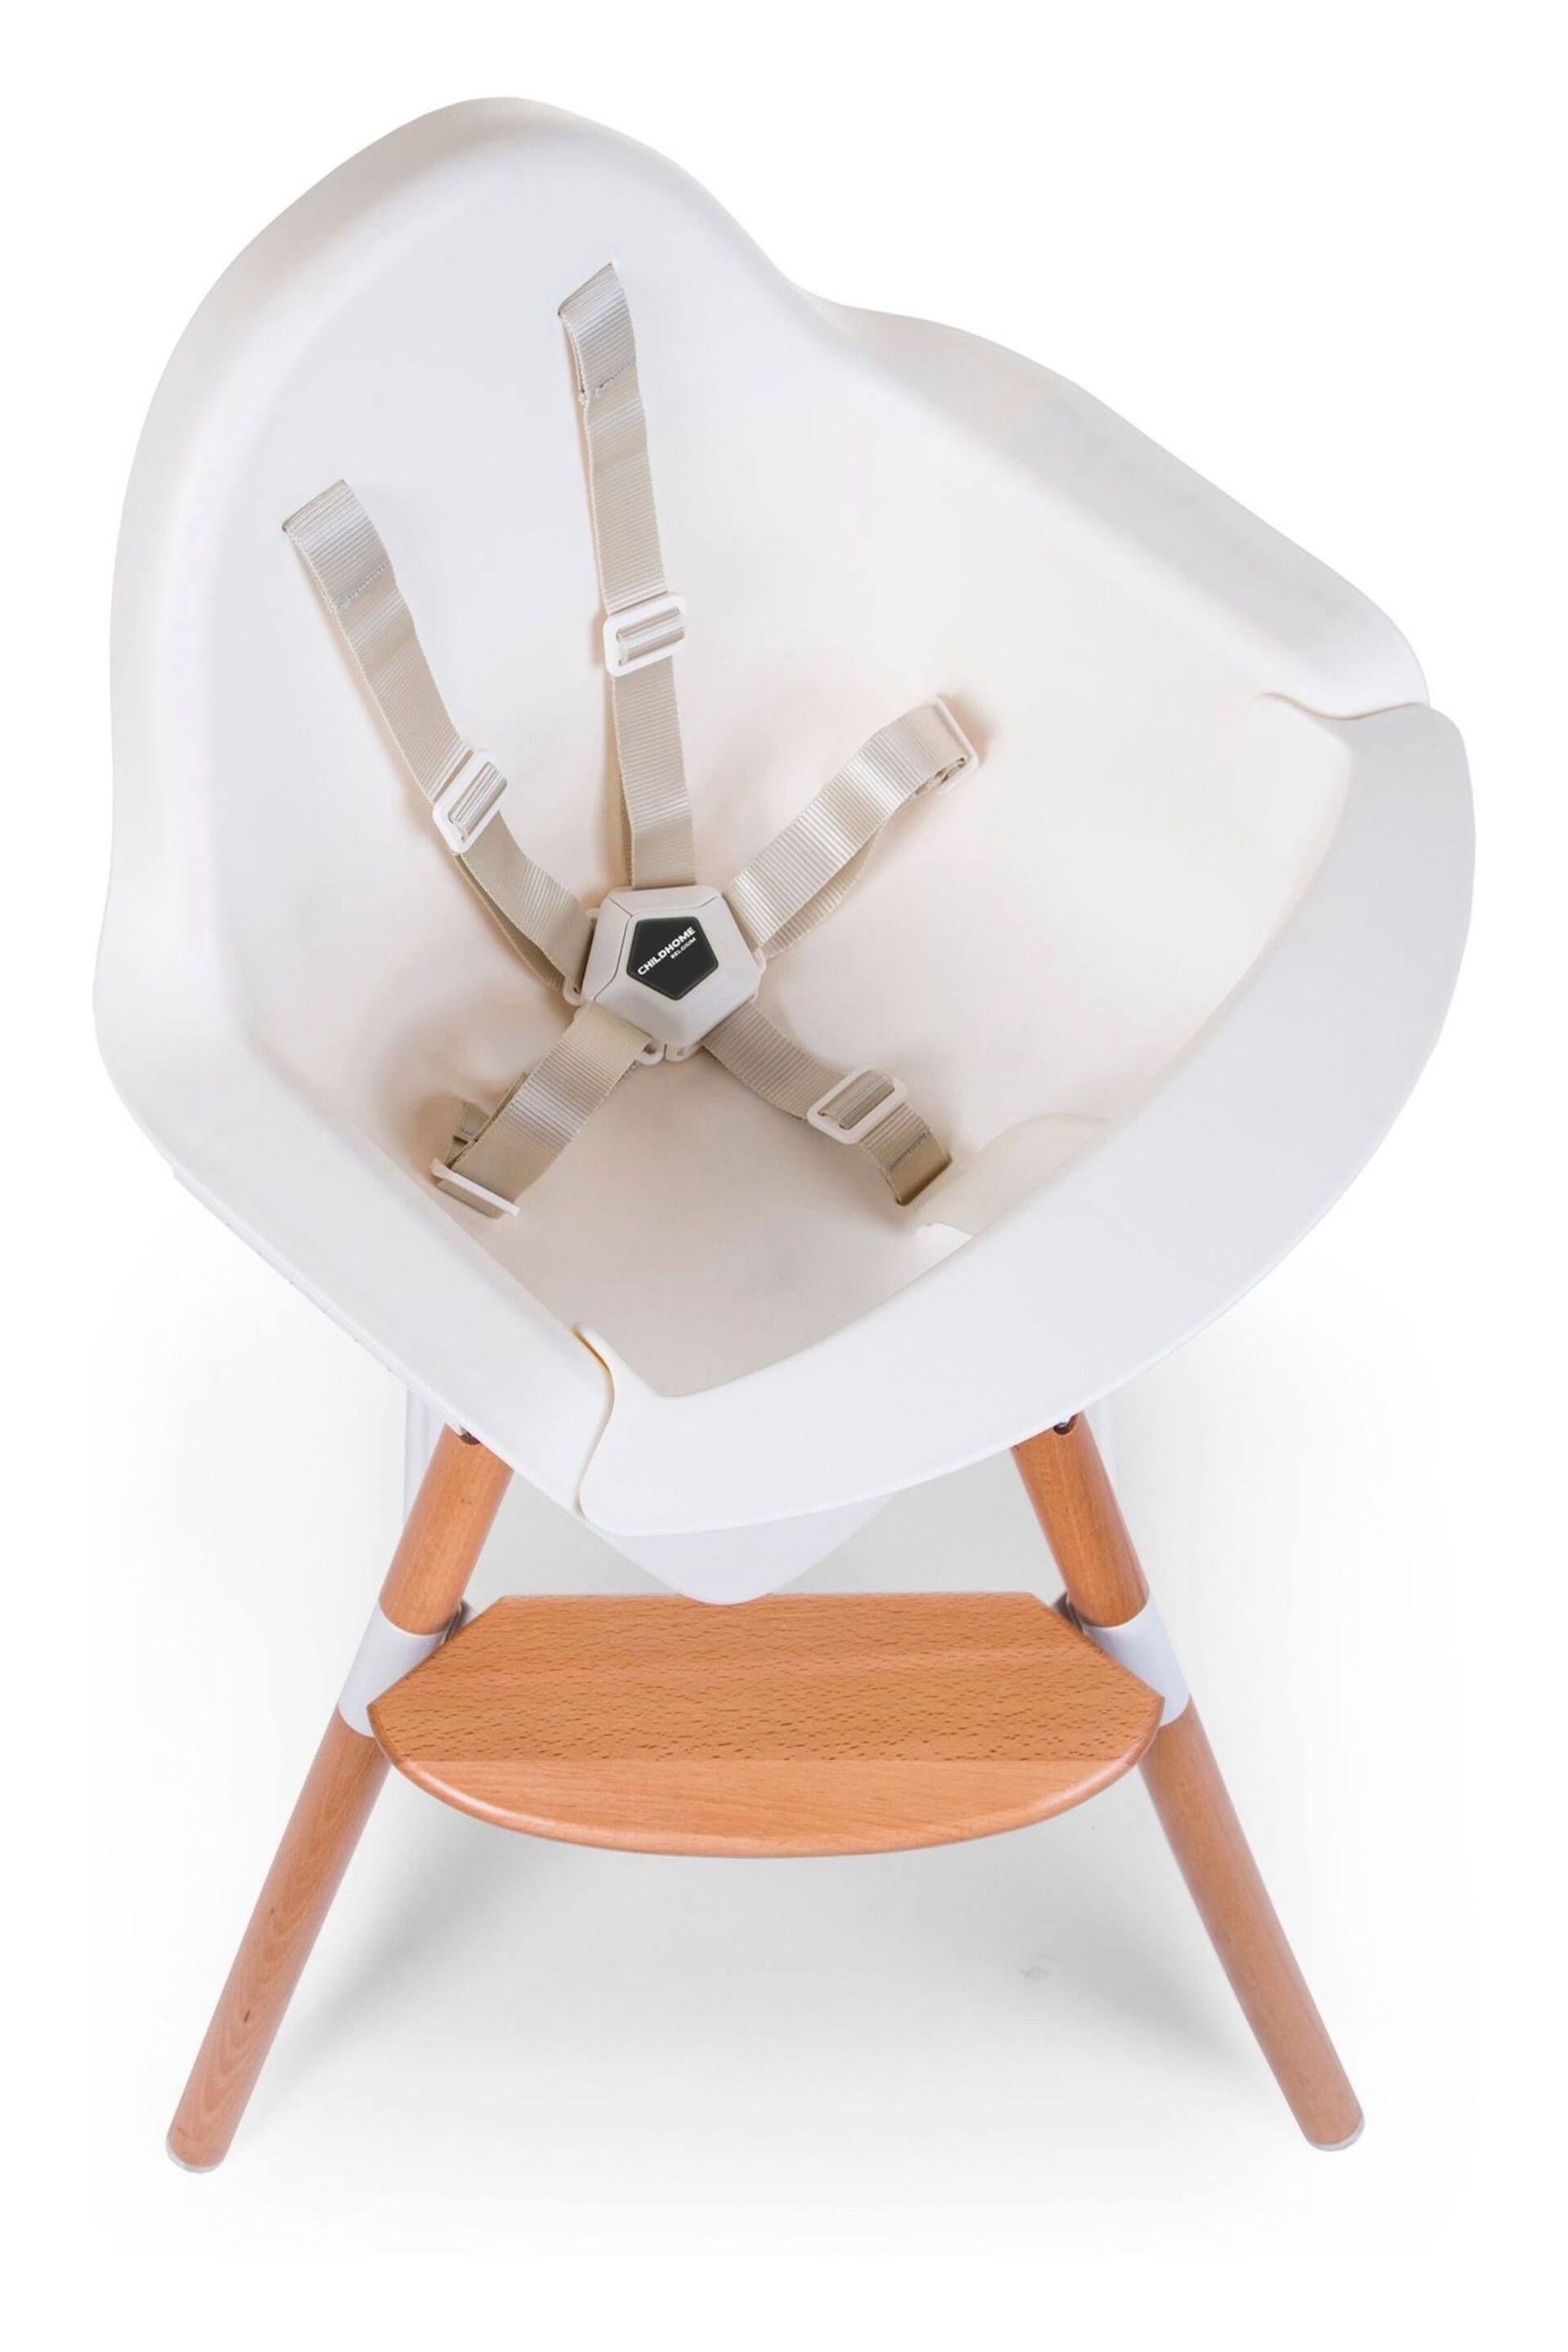 Childhome White Evolu One 80° High Chair White - Image 6 of 10